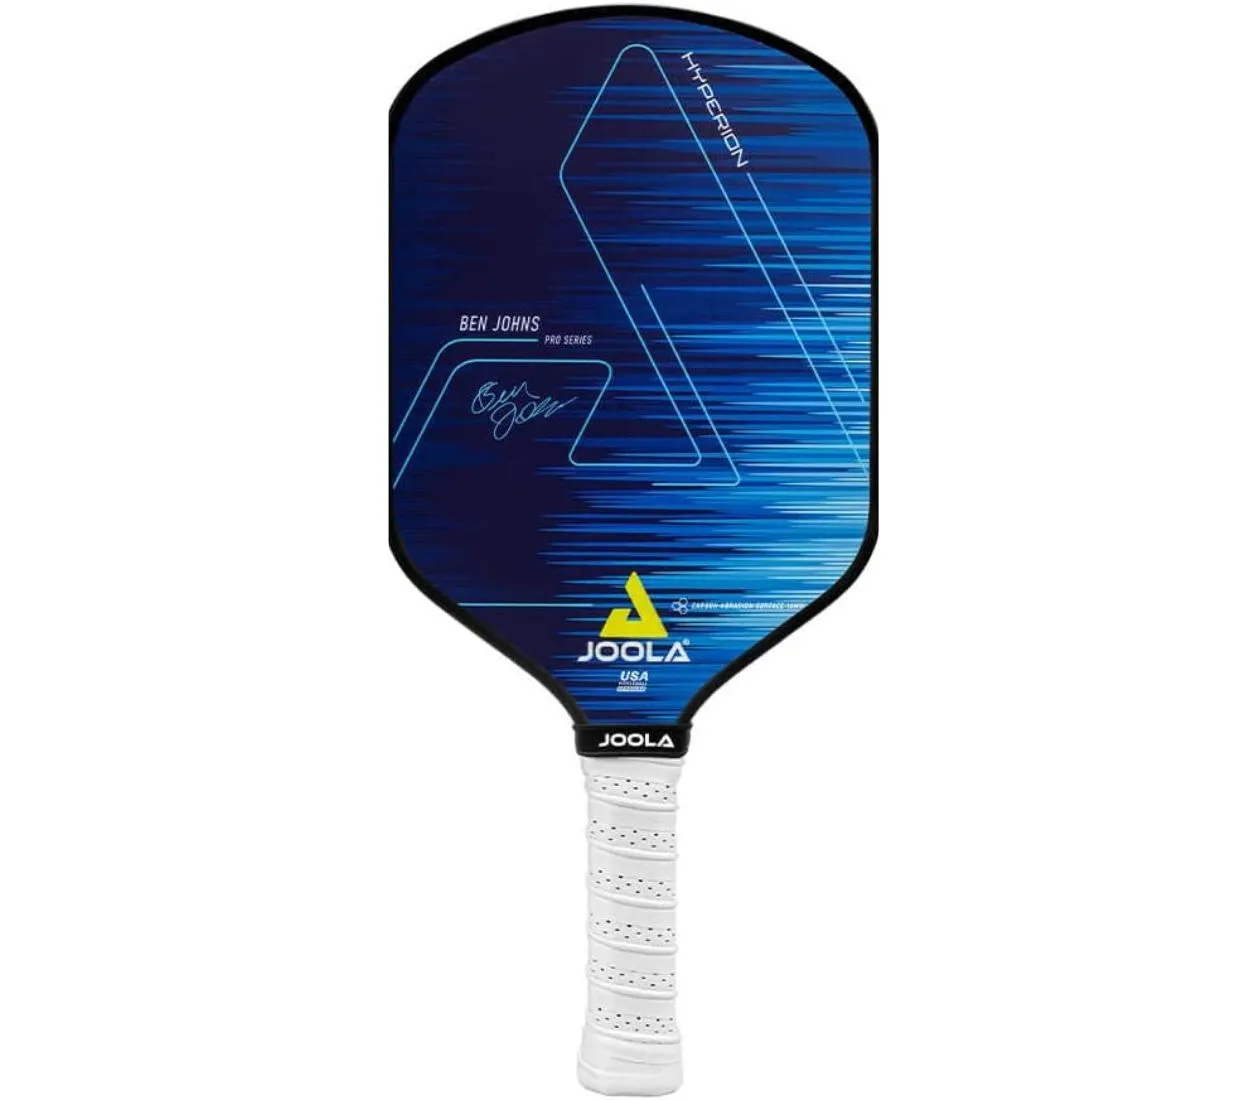 Are you looking for a budget-friendly pickleball paddle that doesn't sacrifice quality? You're in luck! In this article, we'll be discussing the best pickleball paddles under $100.